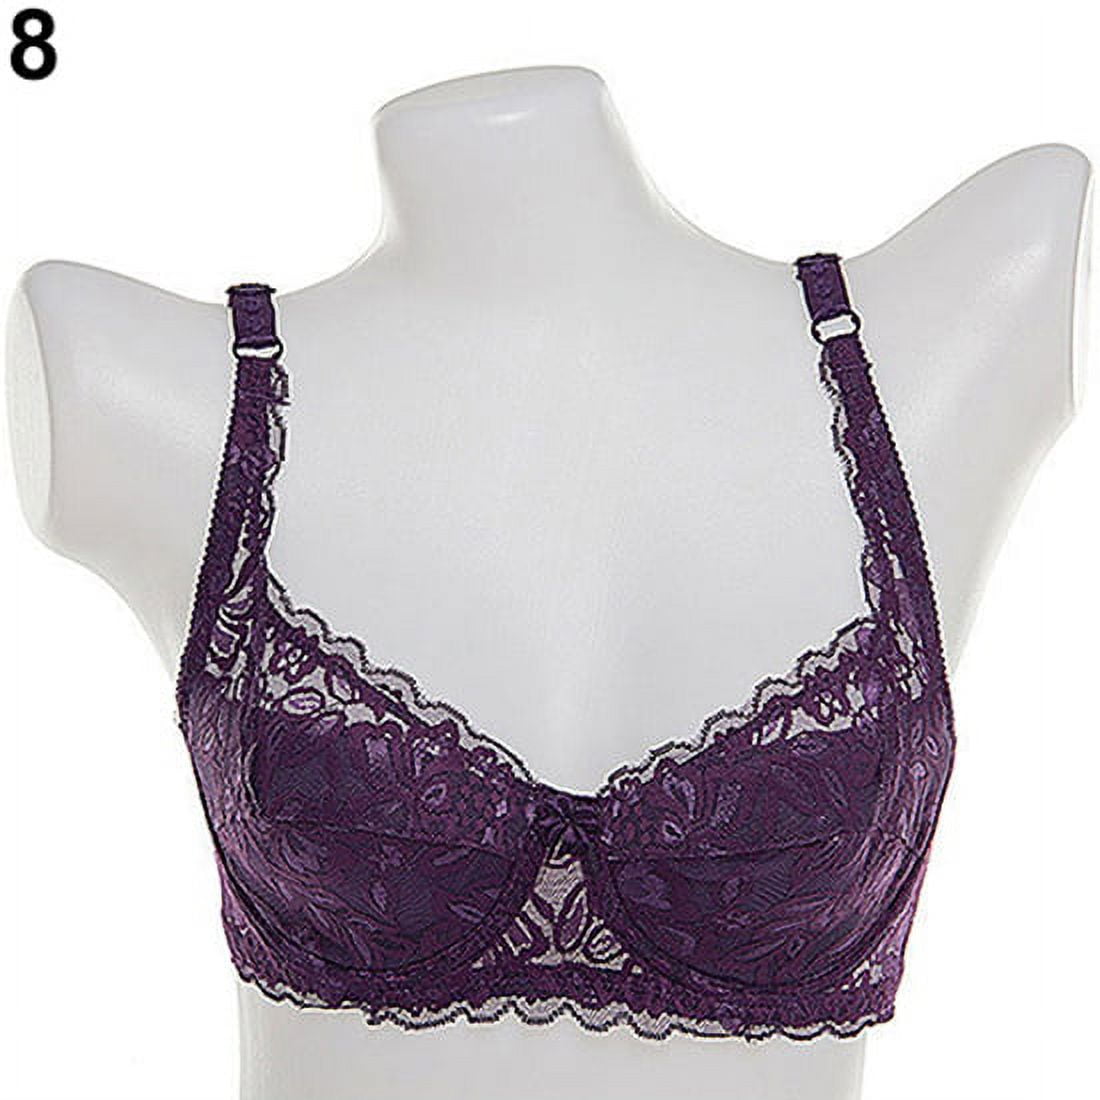 Buy Deep V Young Girl Push up Lace Bralette Breathable Summer Black Big Bra  Tops Plus Size 46 44 42 40 38 36 B C D Cup Bra C306 Purple Cup Size B Bands  Size 46 at